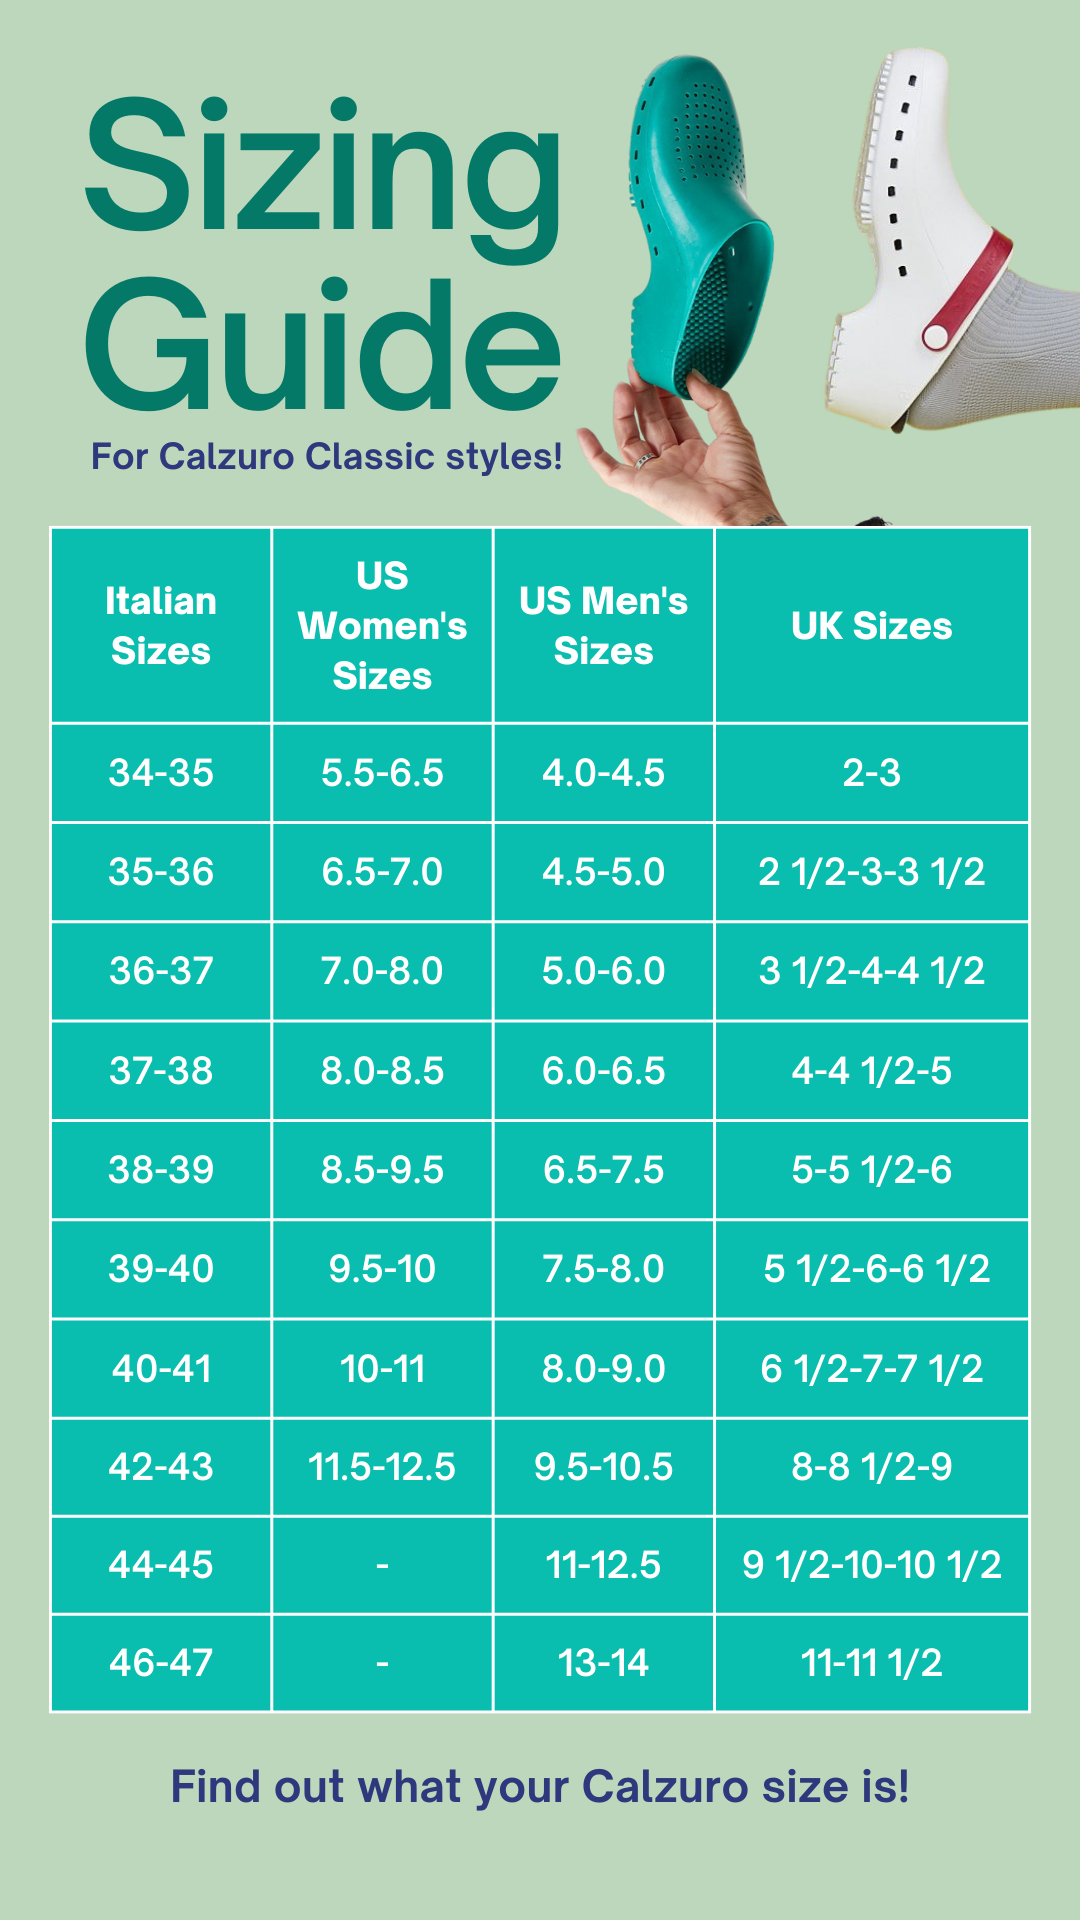 Which Calzuro Classic Size are you? You can use this Guide to figure out what your Italian Shoe size is!